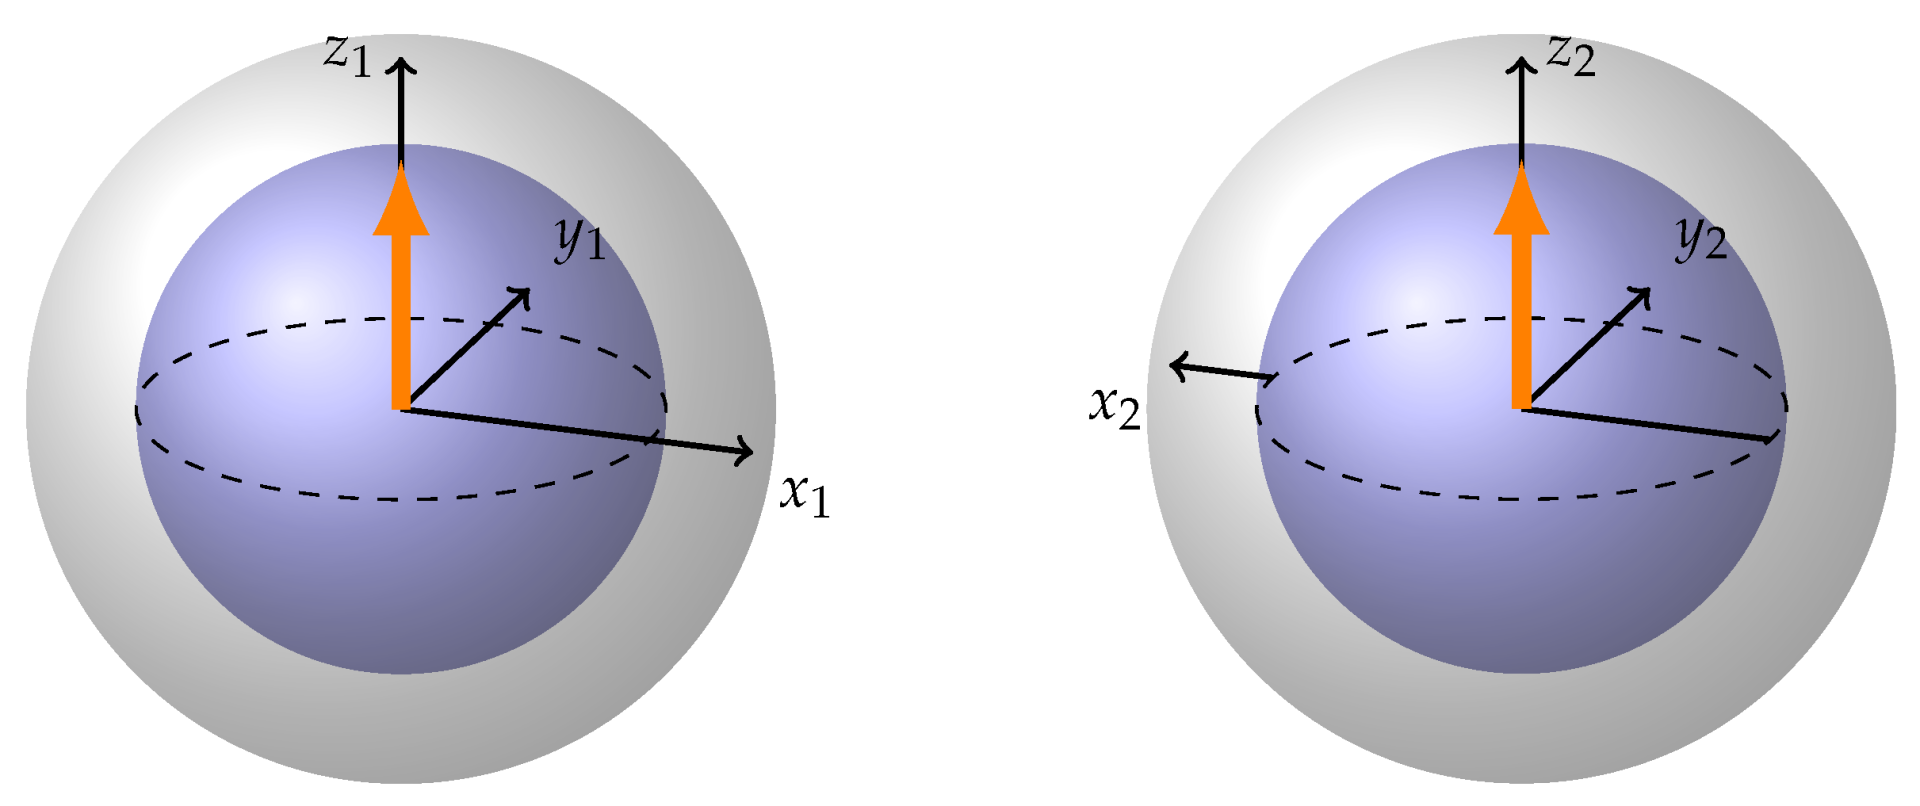 Latvian Physicists Enhance Quantum Understanding With Two Bloch Sphere Representation